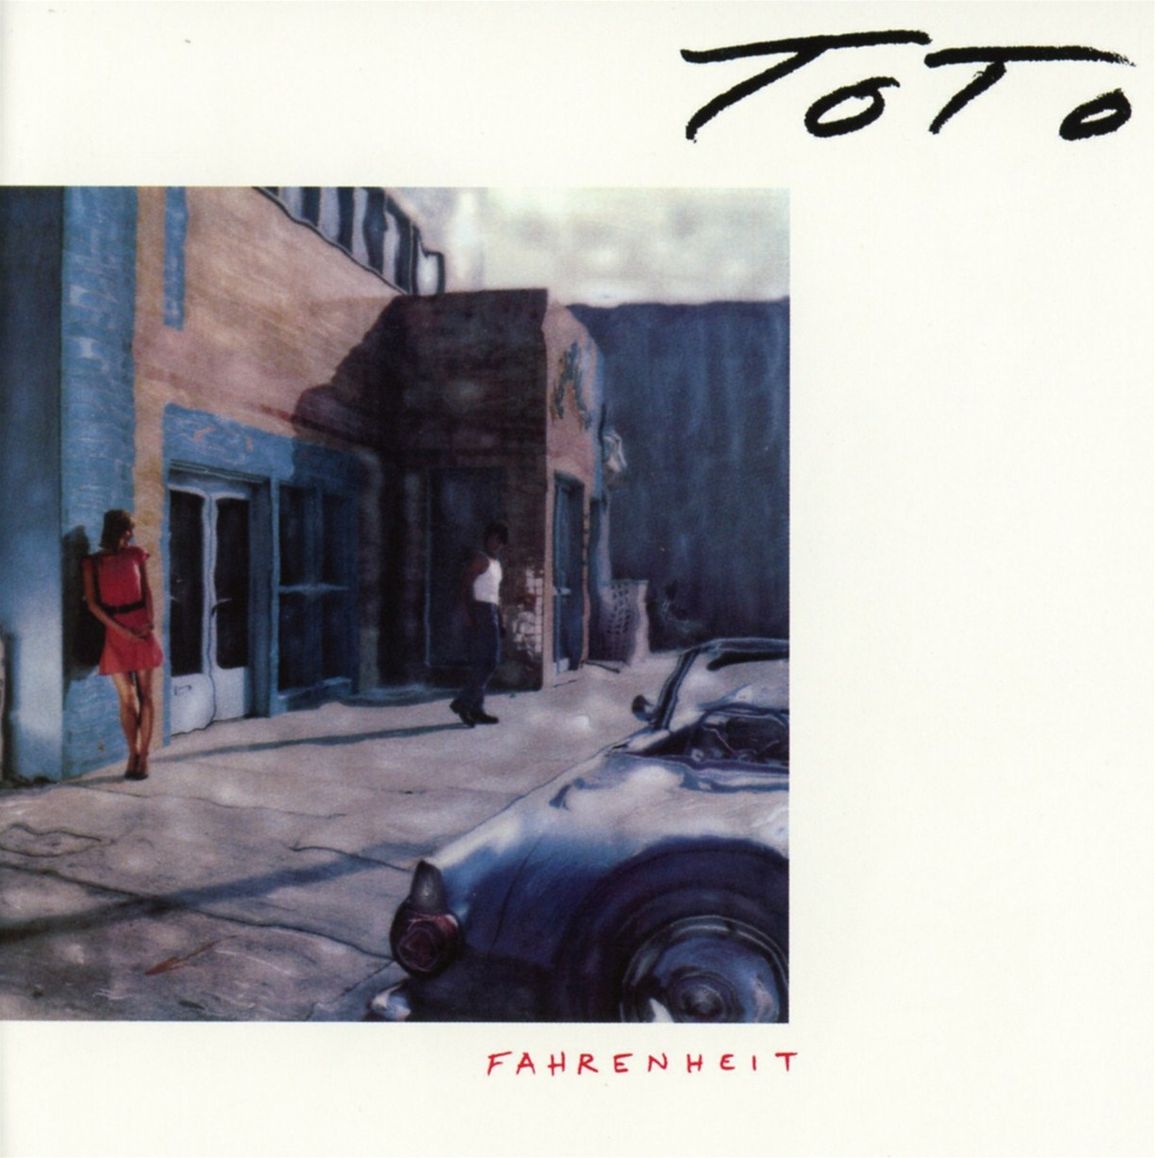 Toto: Fahrenheit (Collector's Edition) (Remastered & Reloaded) (CD) – jpc